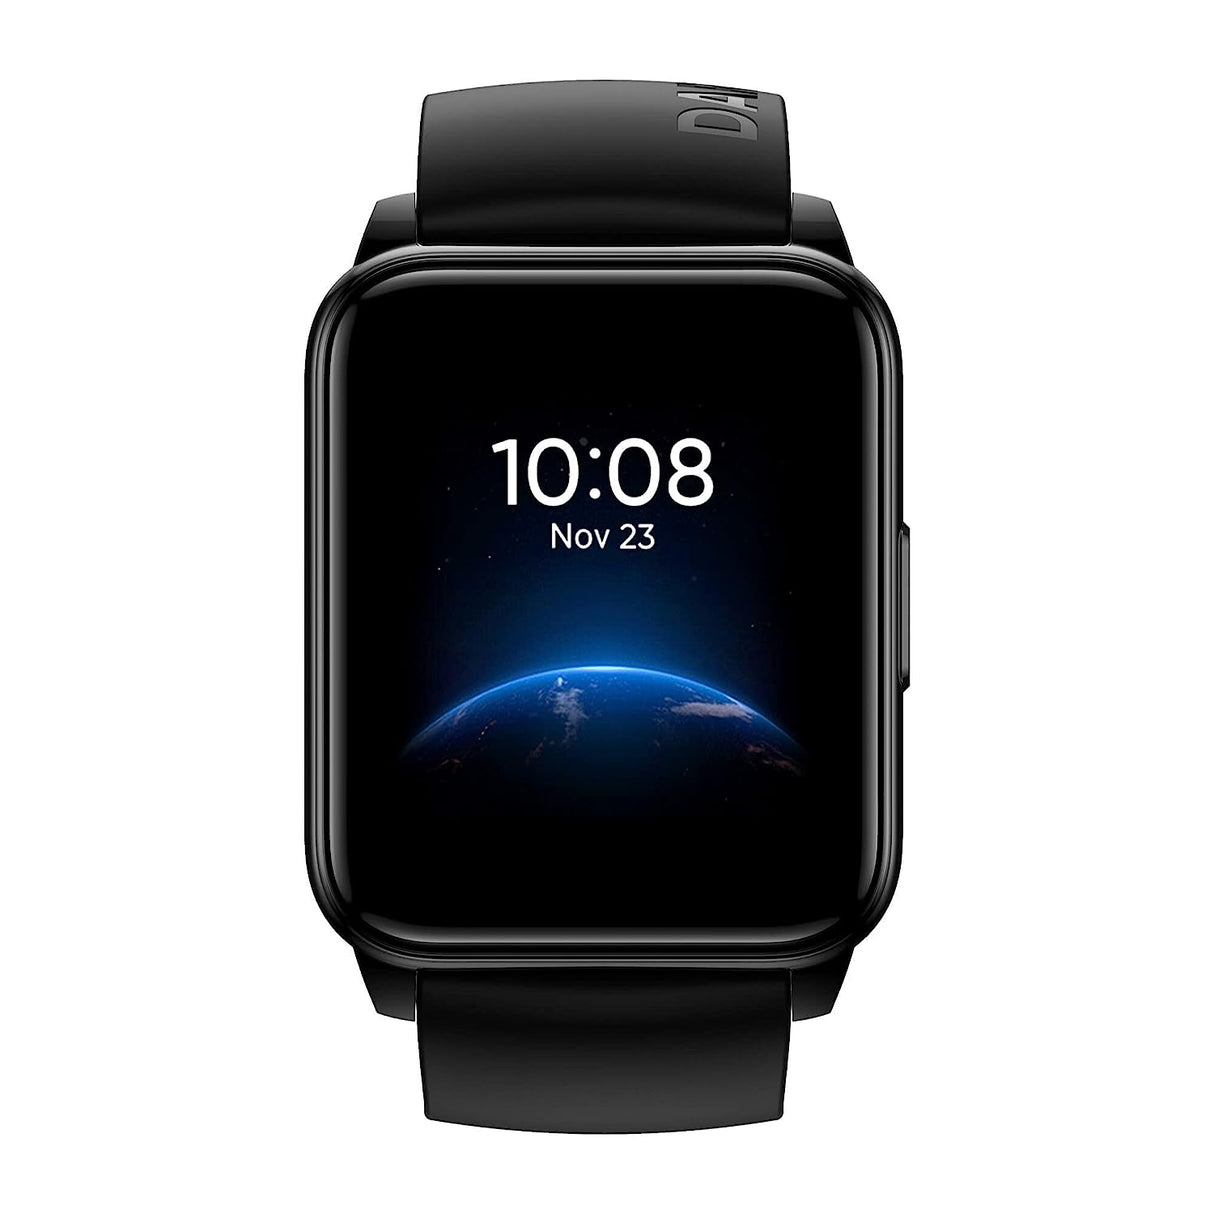 Realme Smart Watch 2 | Super Bright 1.4 Inch HD Display | Support Multiple Watch Faces & 90 Sport Mode | 12 Days Battery Backup | IP68 Water Resistant| Monitors Heart Rate & Blood Oxygen Level | Black